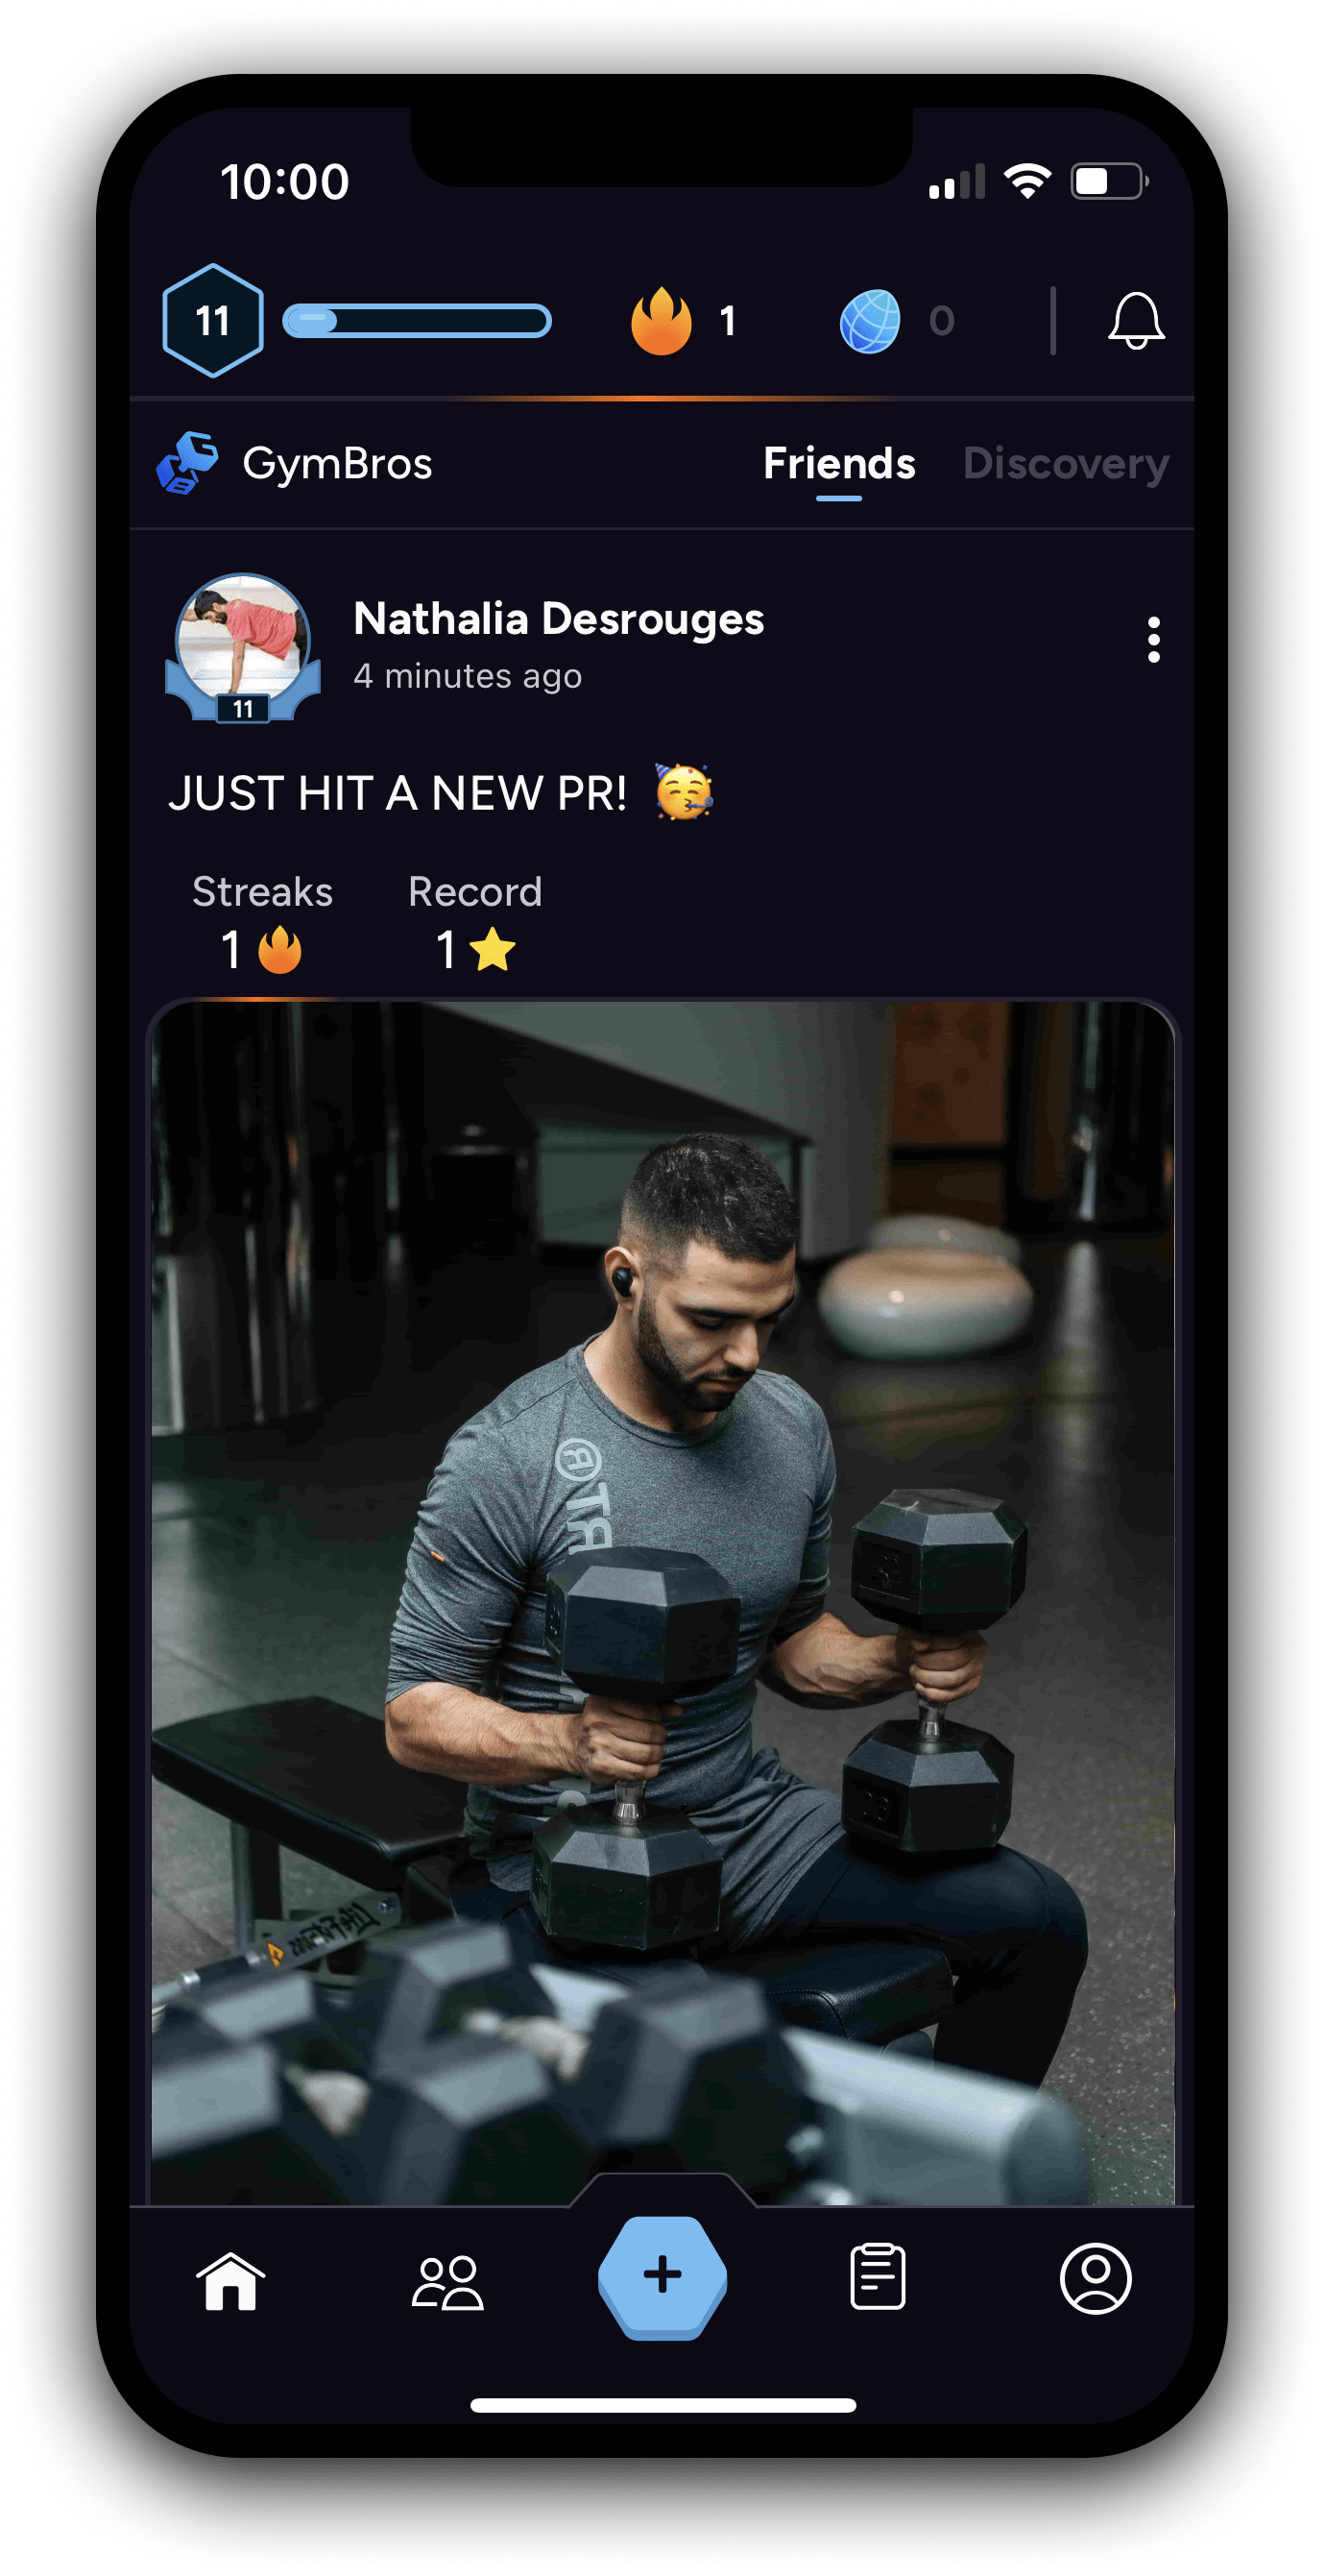 https://getgymbros.com/images/hero/image1.png